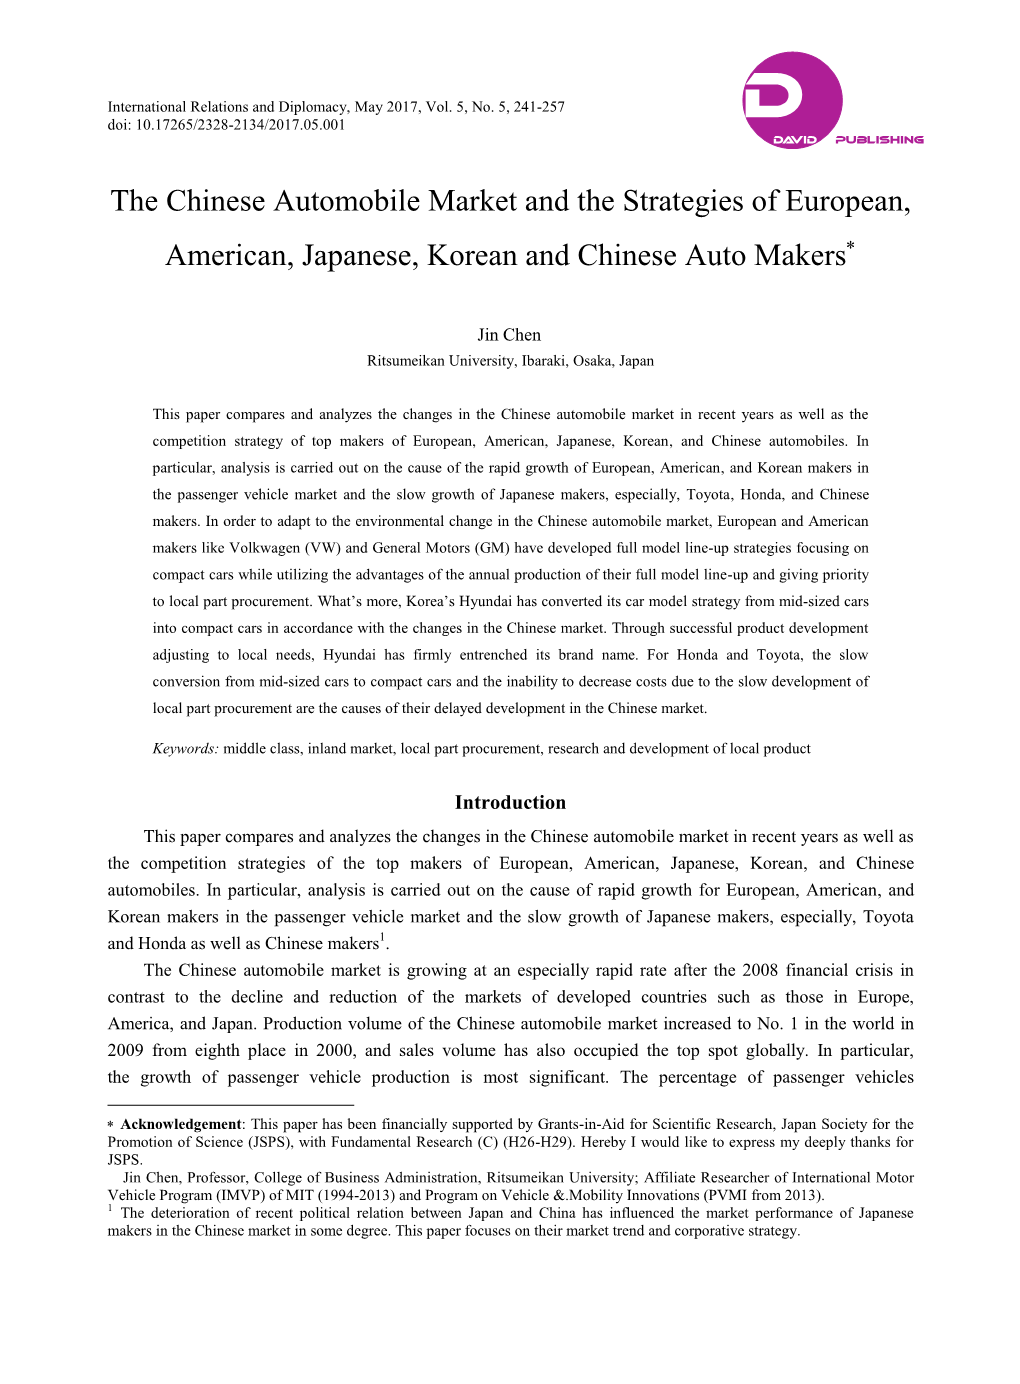 The Chinese Automobile Market and the Strategies of European, American, Japanese, Korean and Chinese Auto Makers